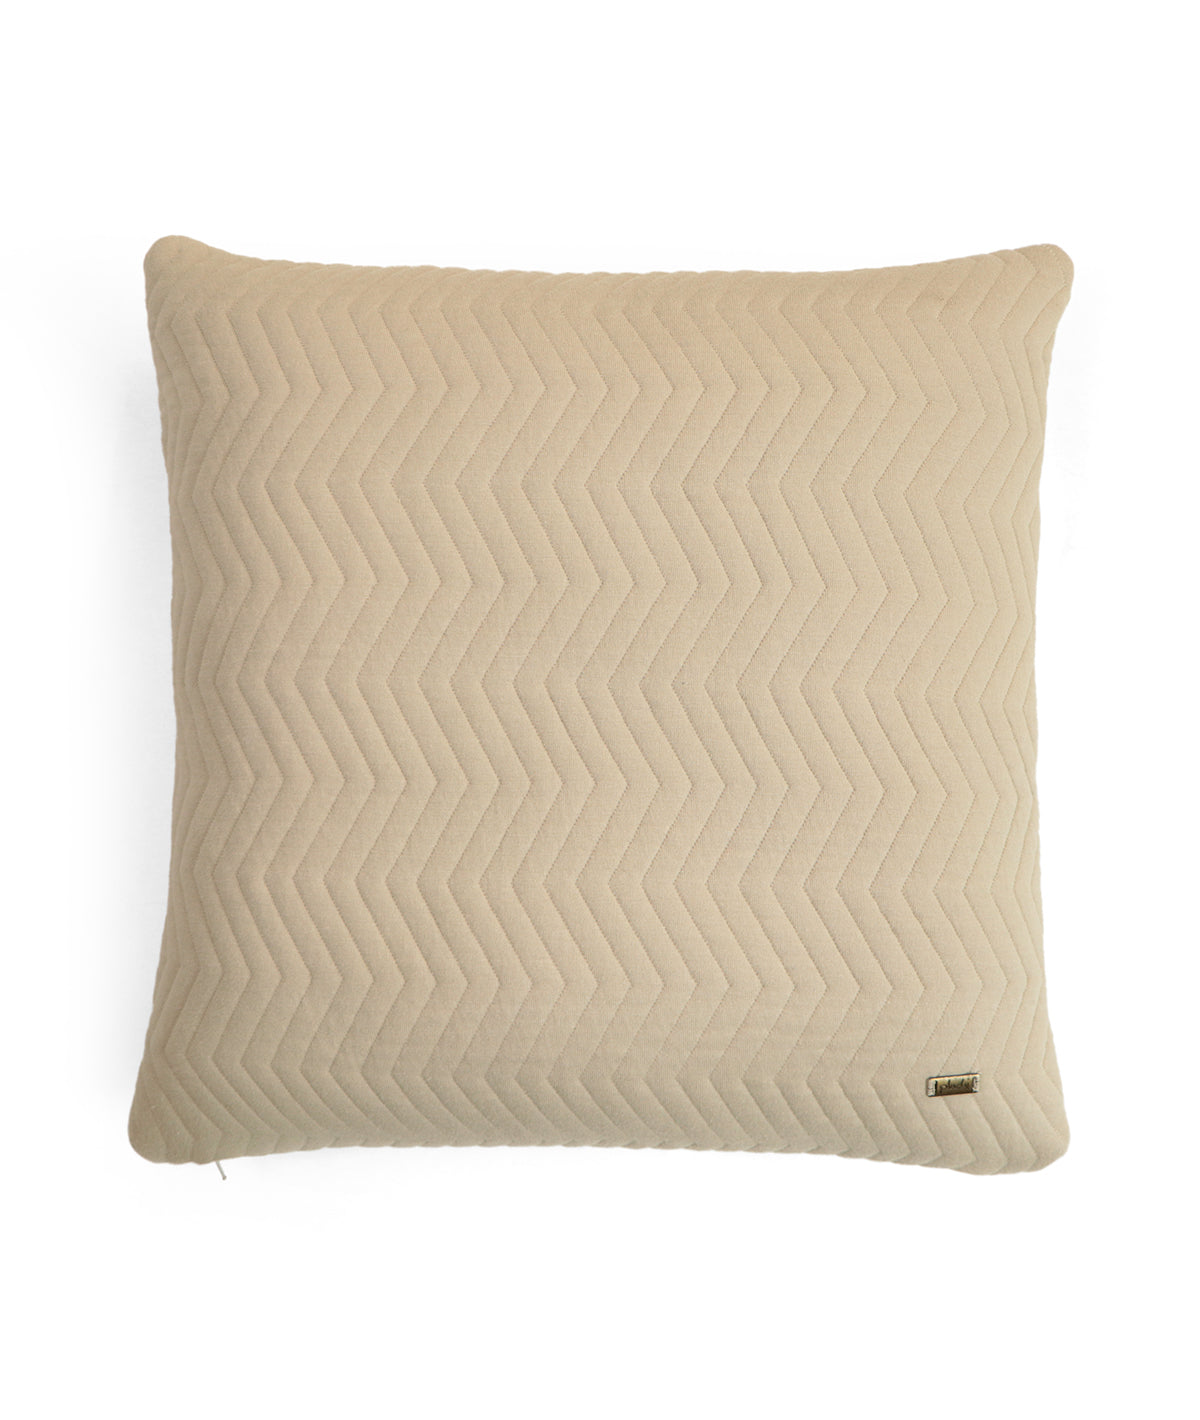 Zig-Zag Pale Whisper & Natural Cotton Knitted Quilted Decorative 18 X 18 Inches Cushion Cover